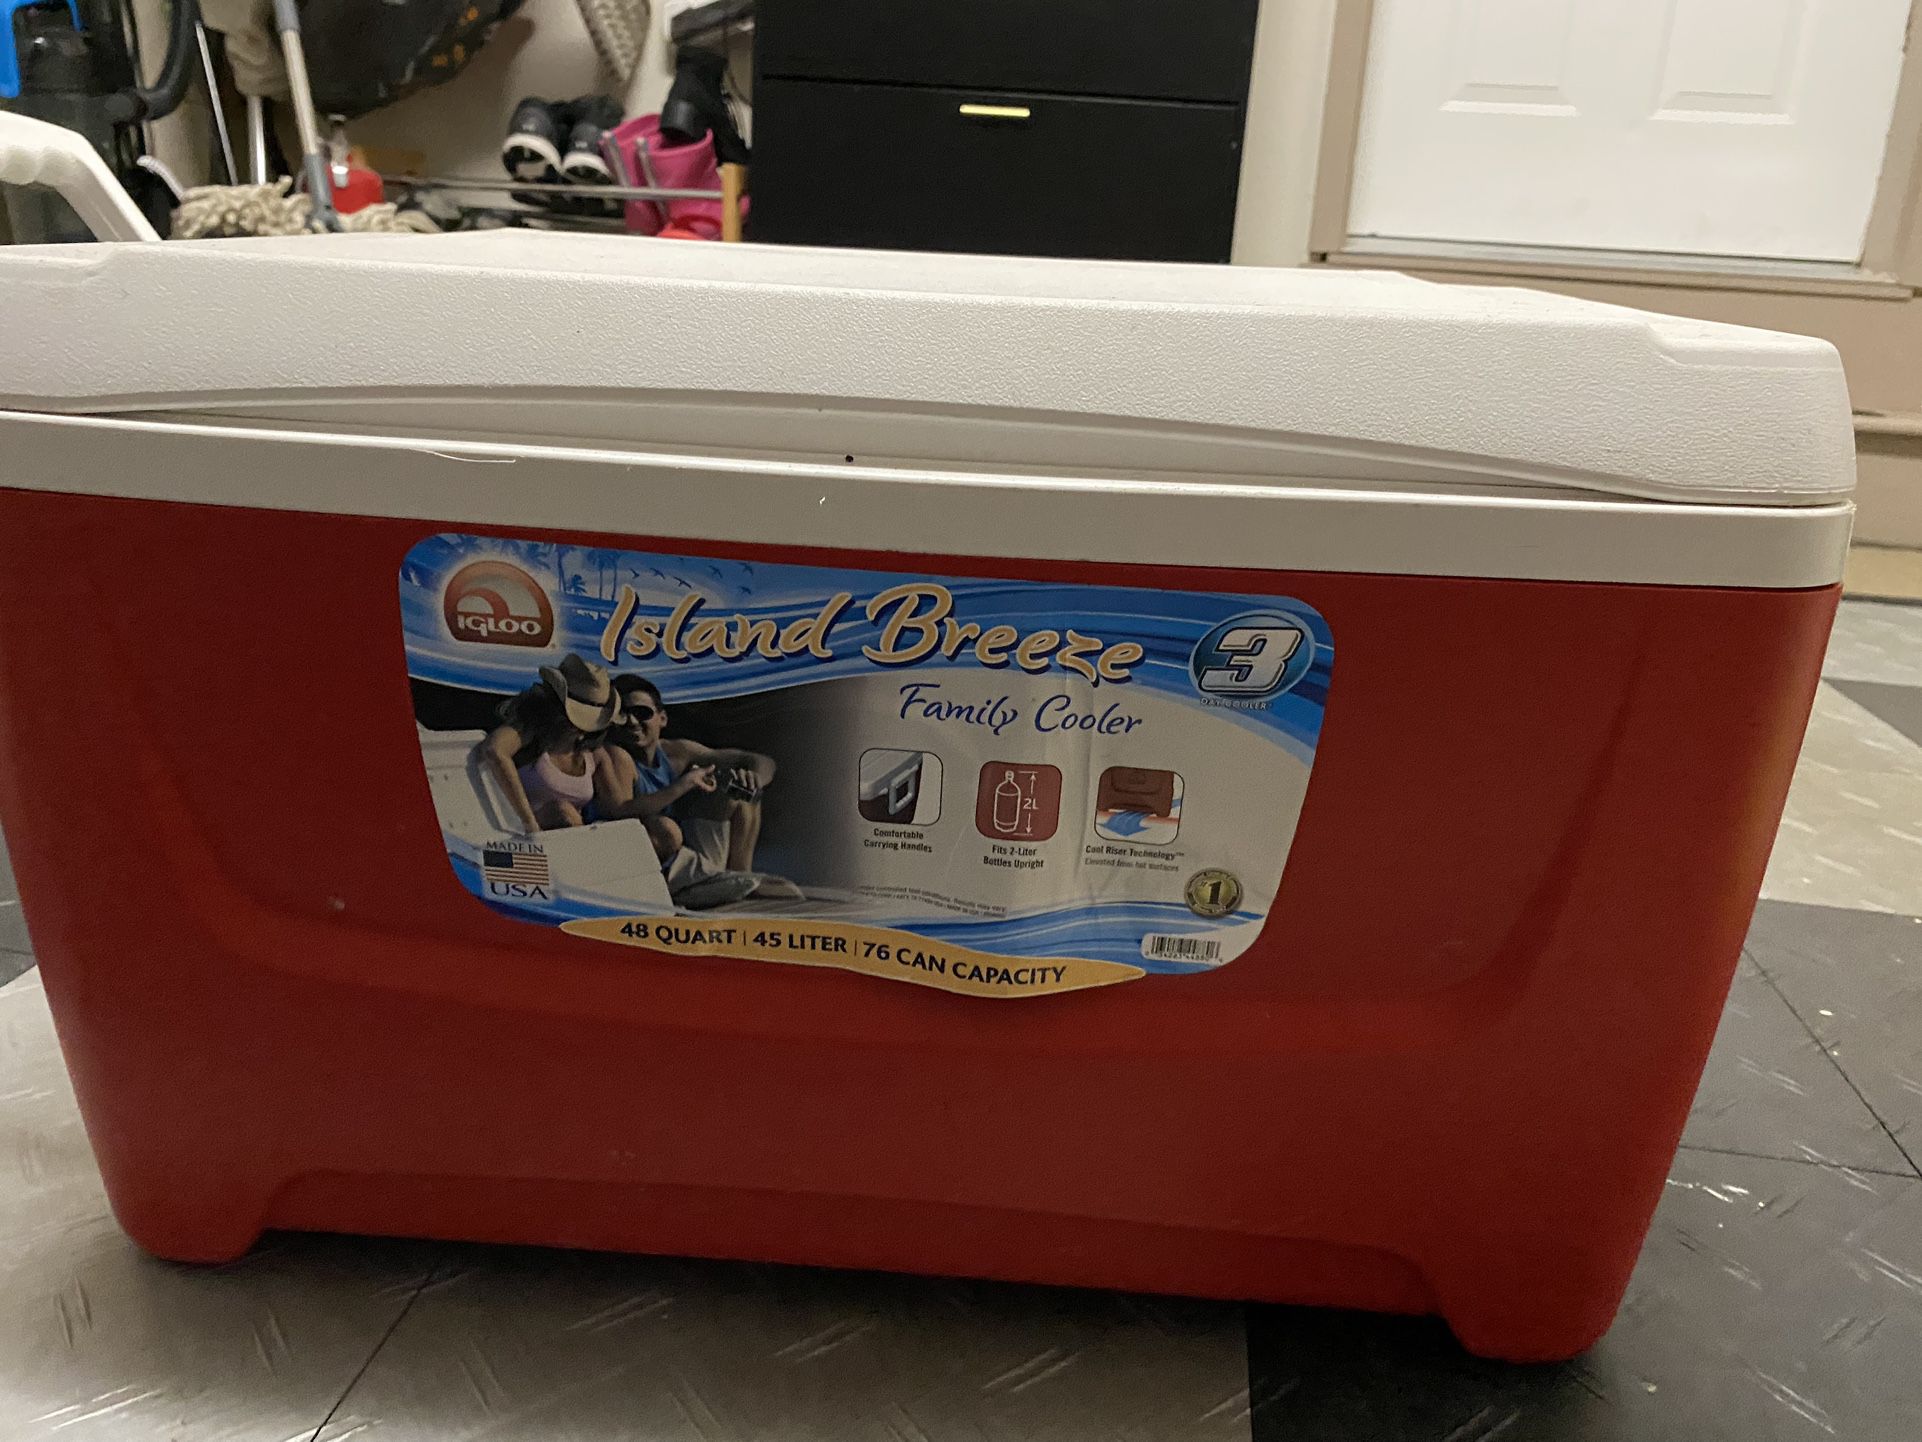 Traveling Cooler - Excellent Condition 